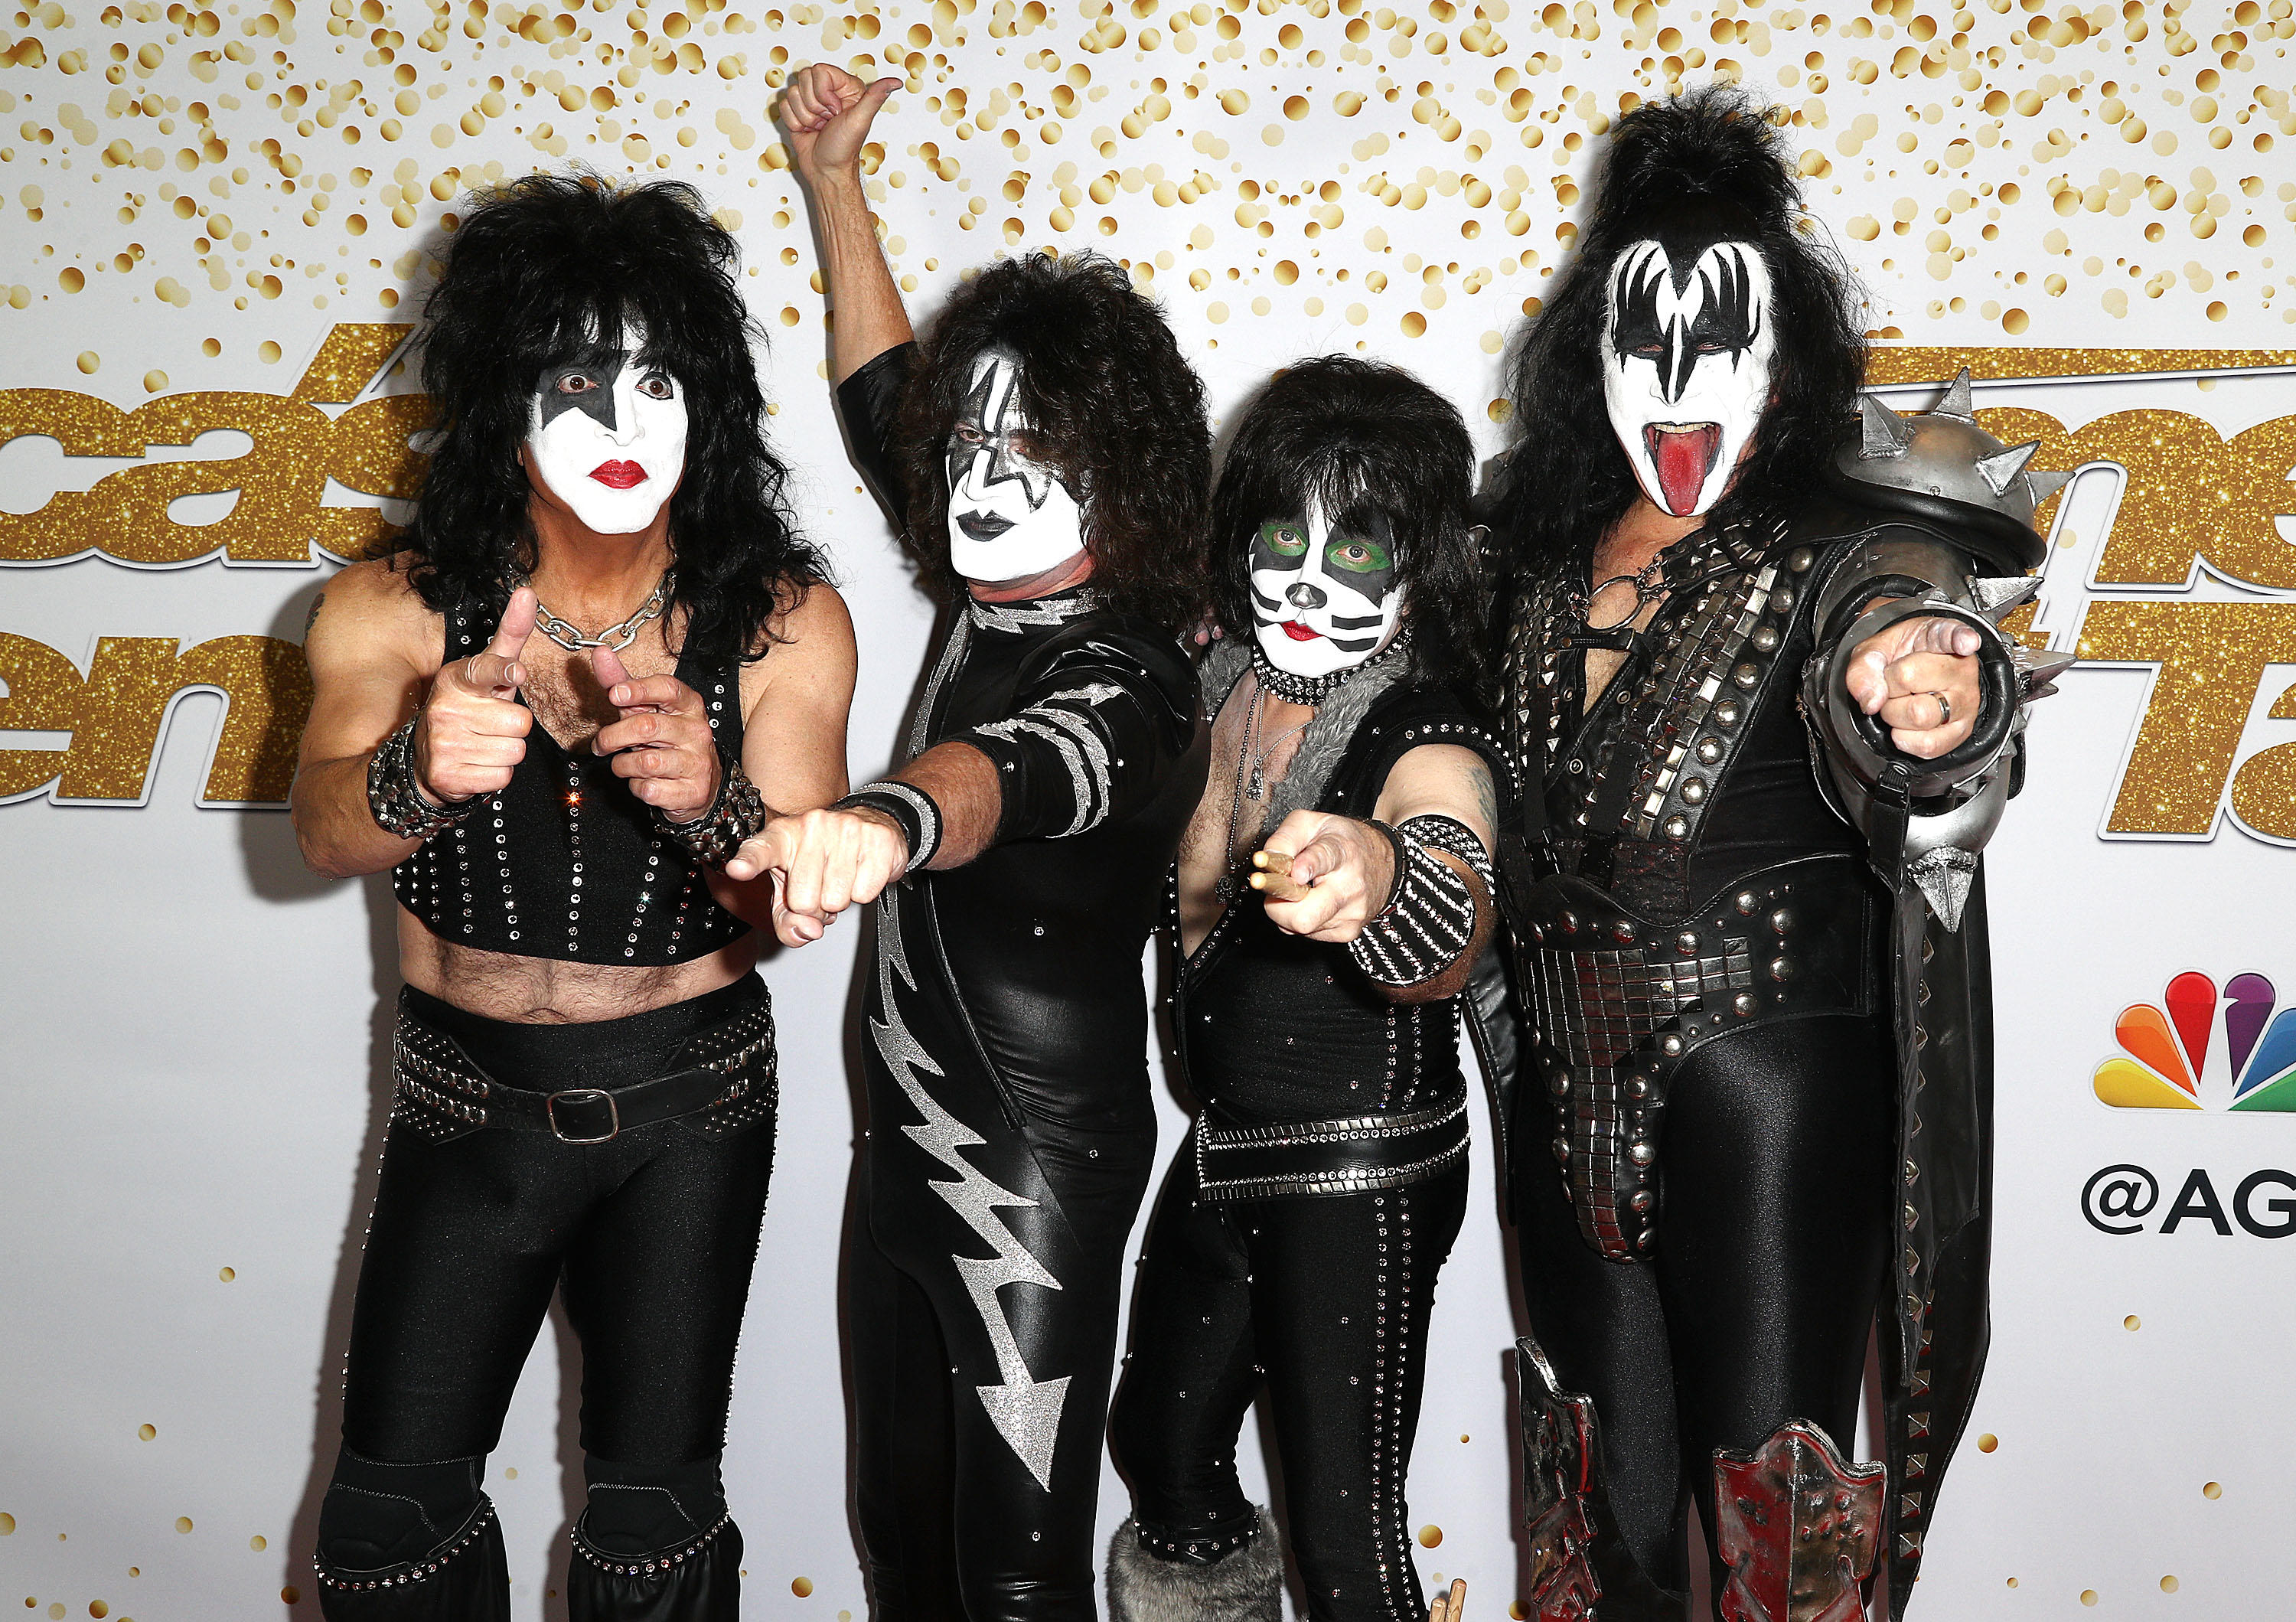 KISS farewell tour "End of the Road" will be the final tour ever for